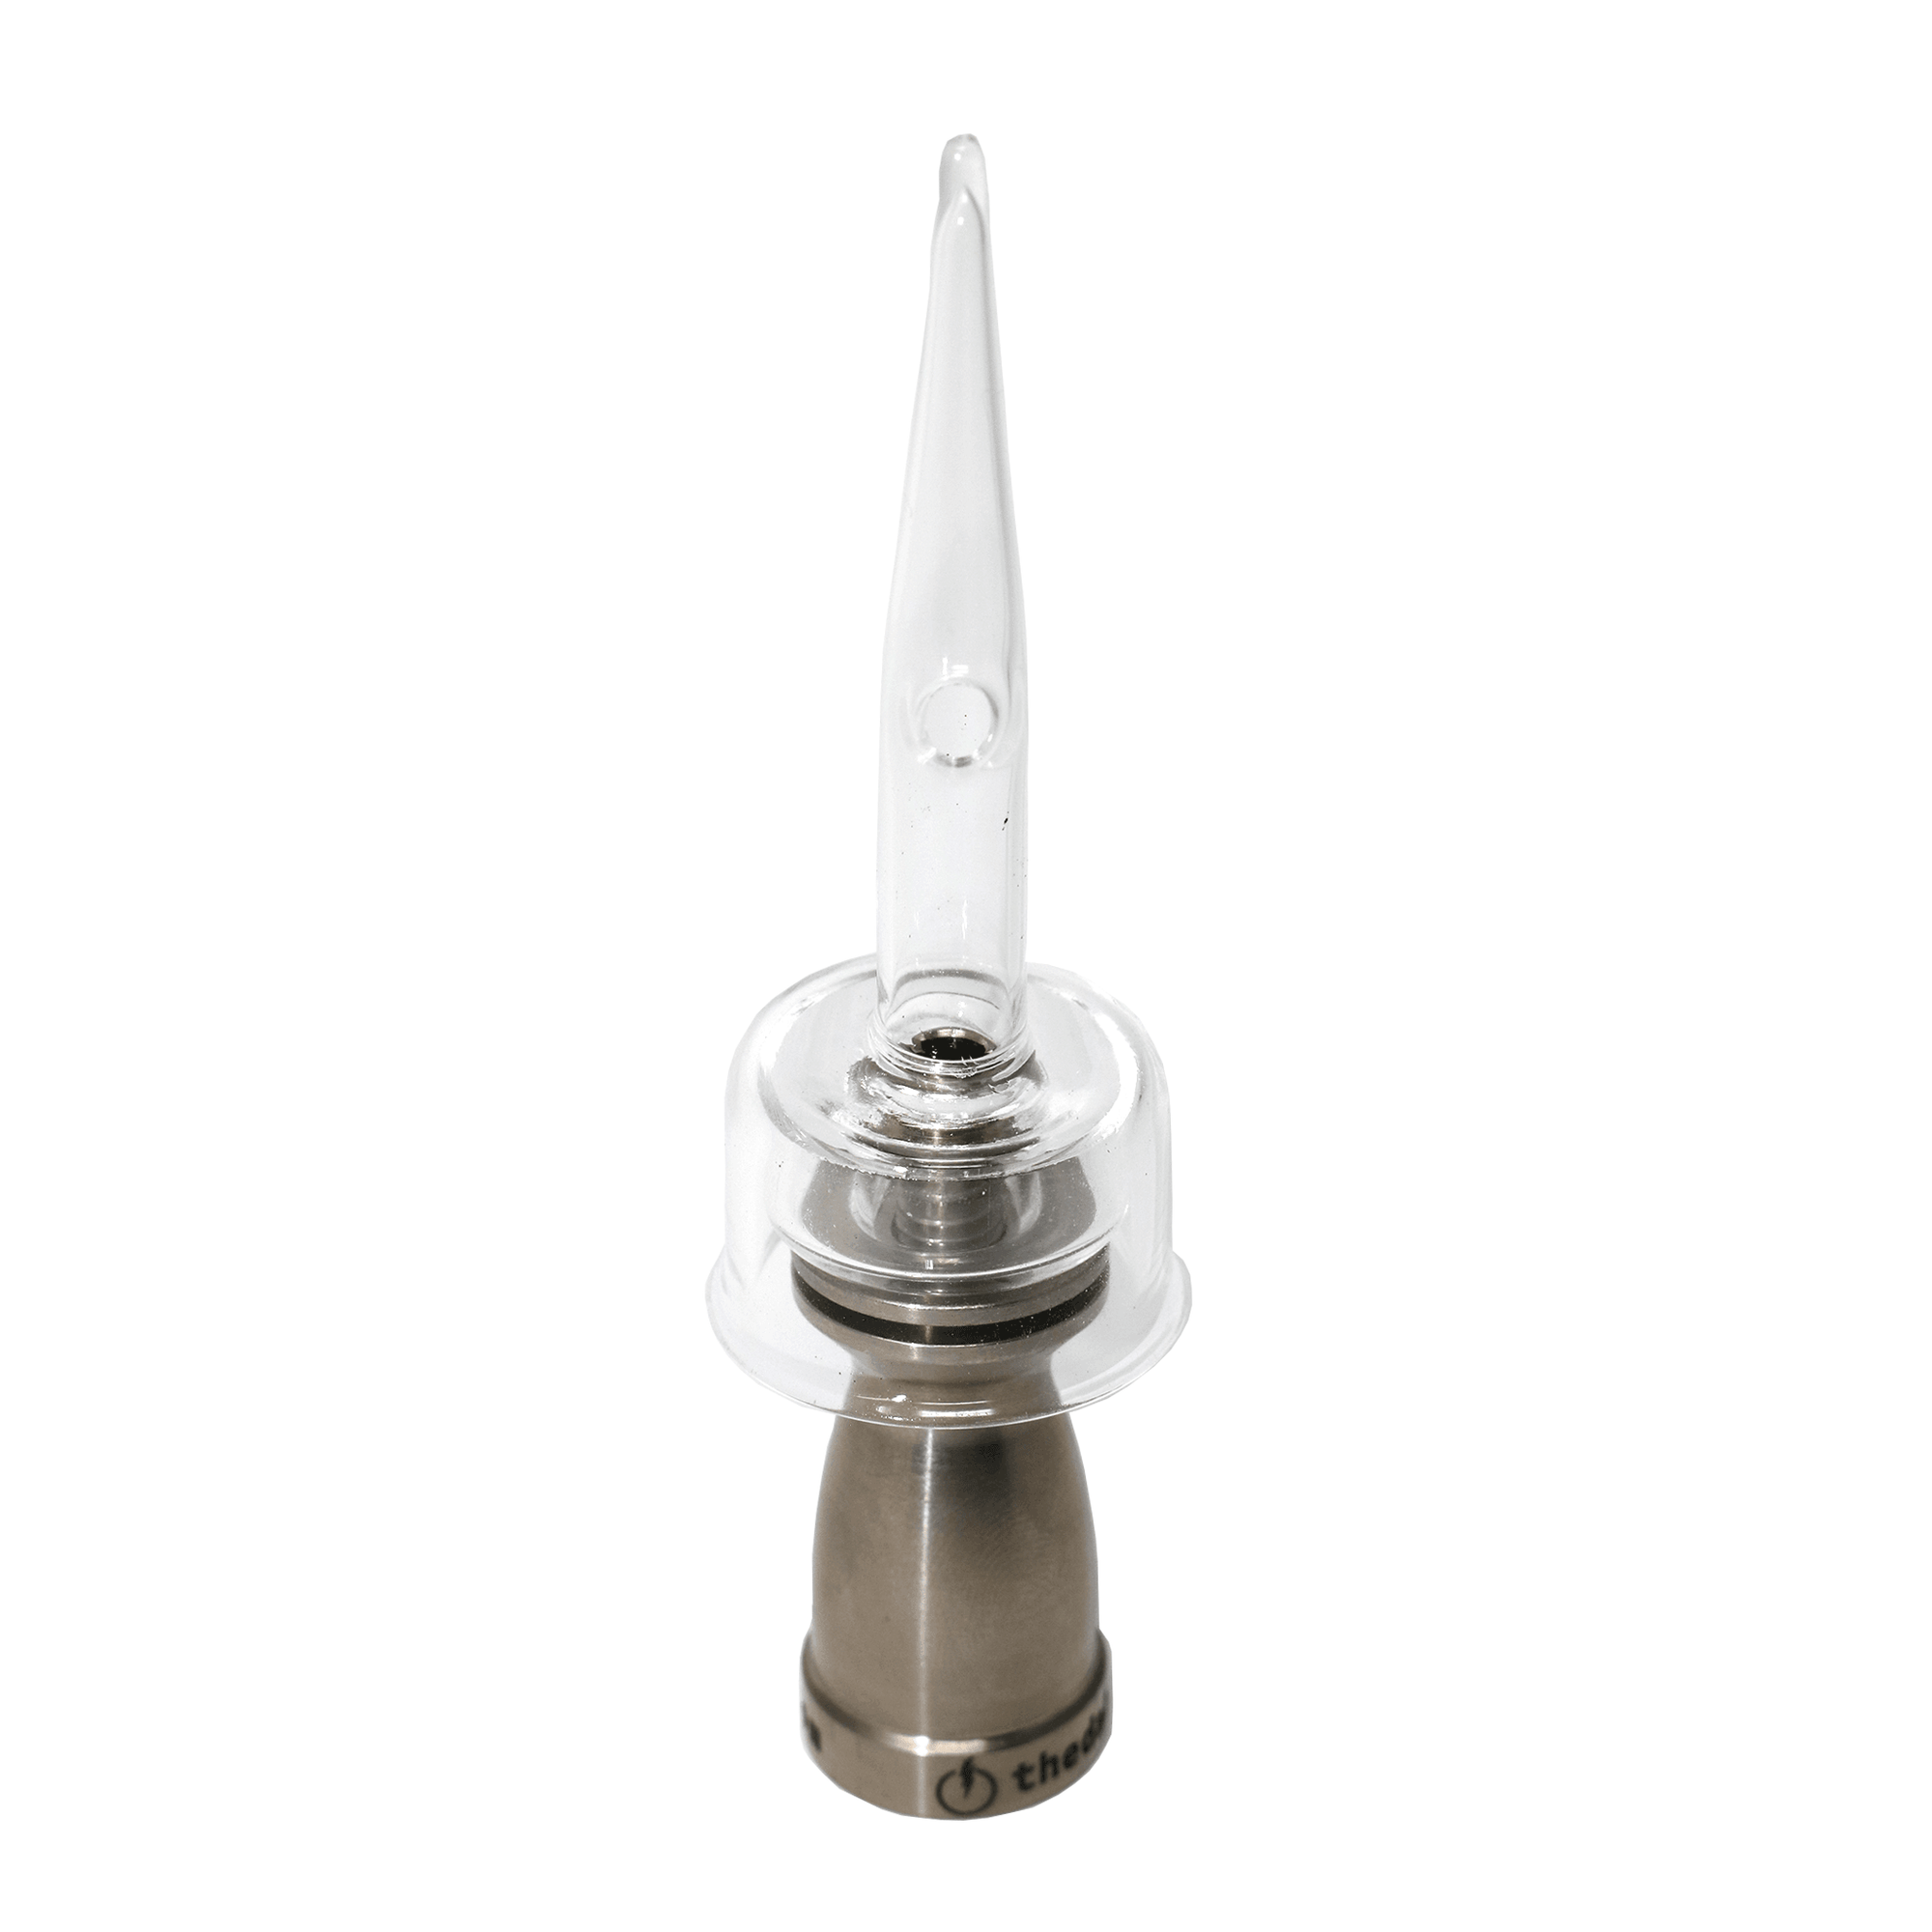 Carb Cap Dabber for Hybrid Nails | Capped Hybrid Nail View In Use | the dabbing specialists